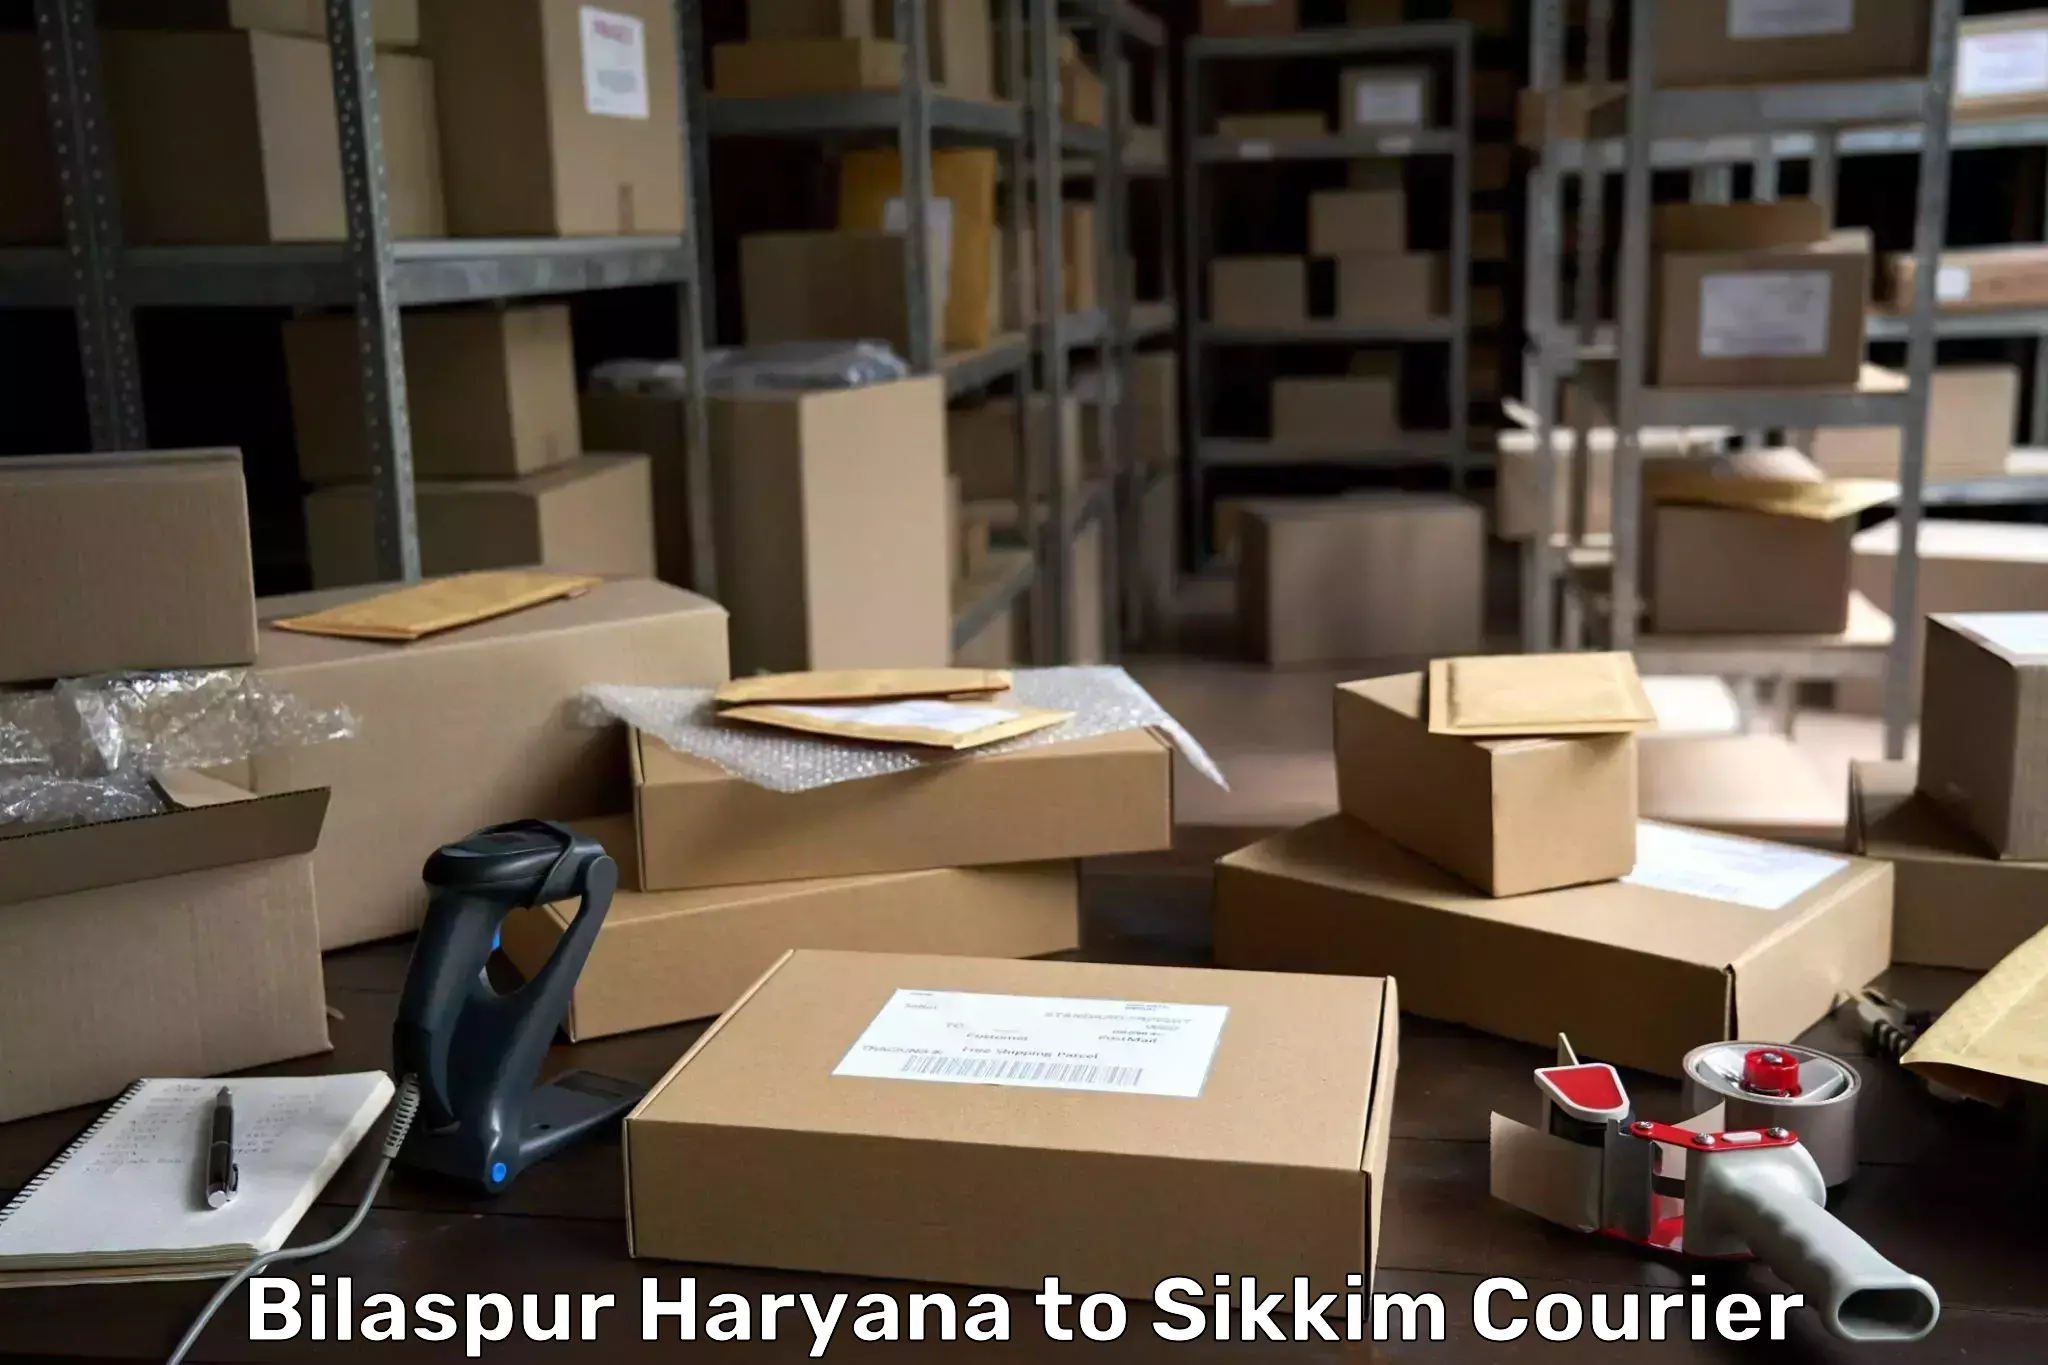 International courier networks Bilaspur Haryana to East Sikkim